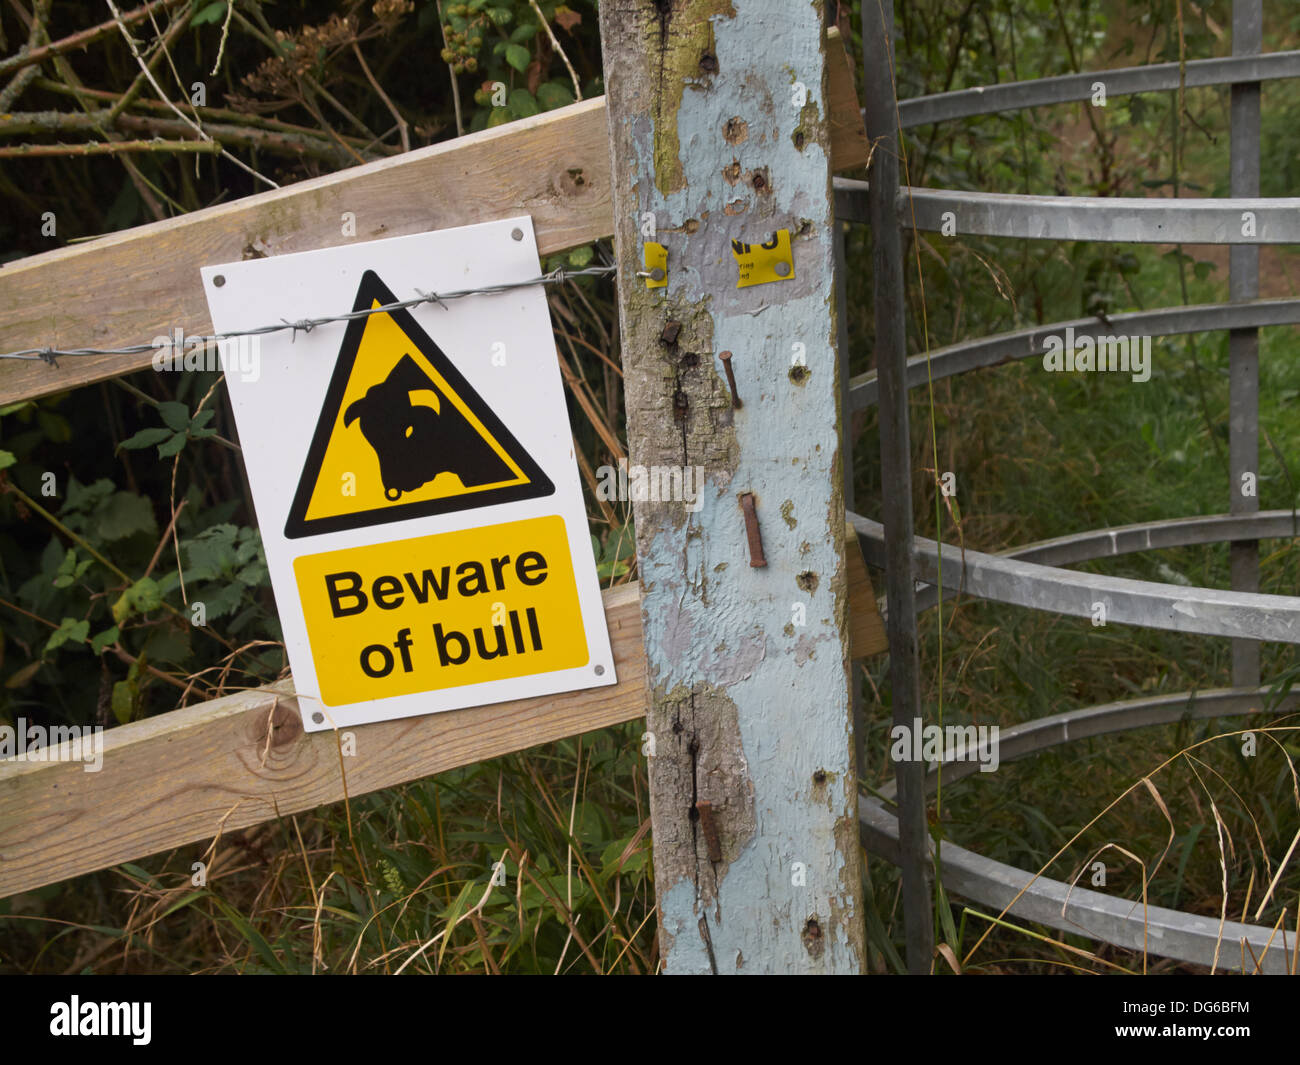 Beware of bull sign, Oxfordshire, England Stock Photo